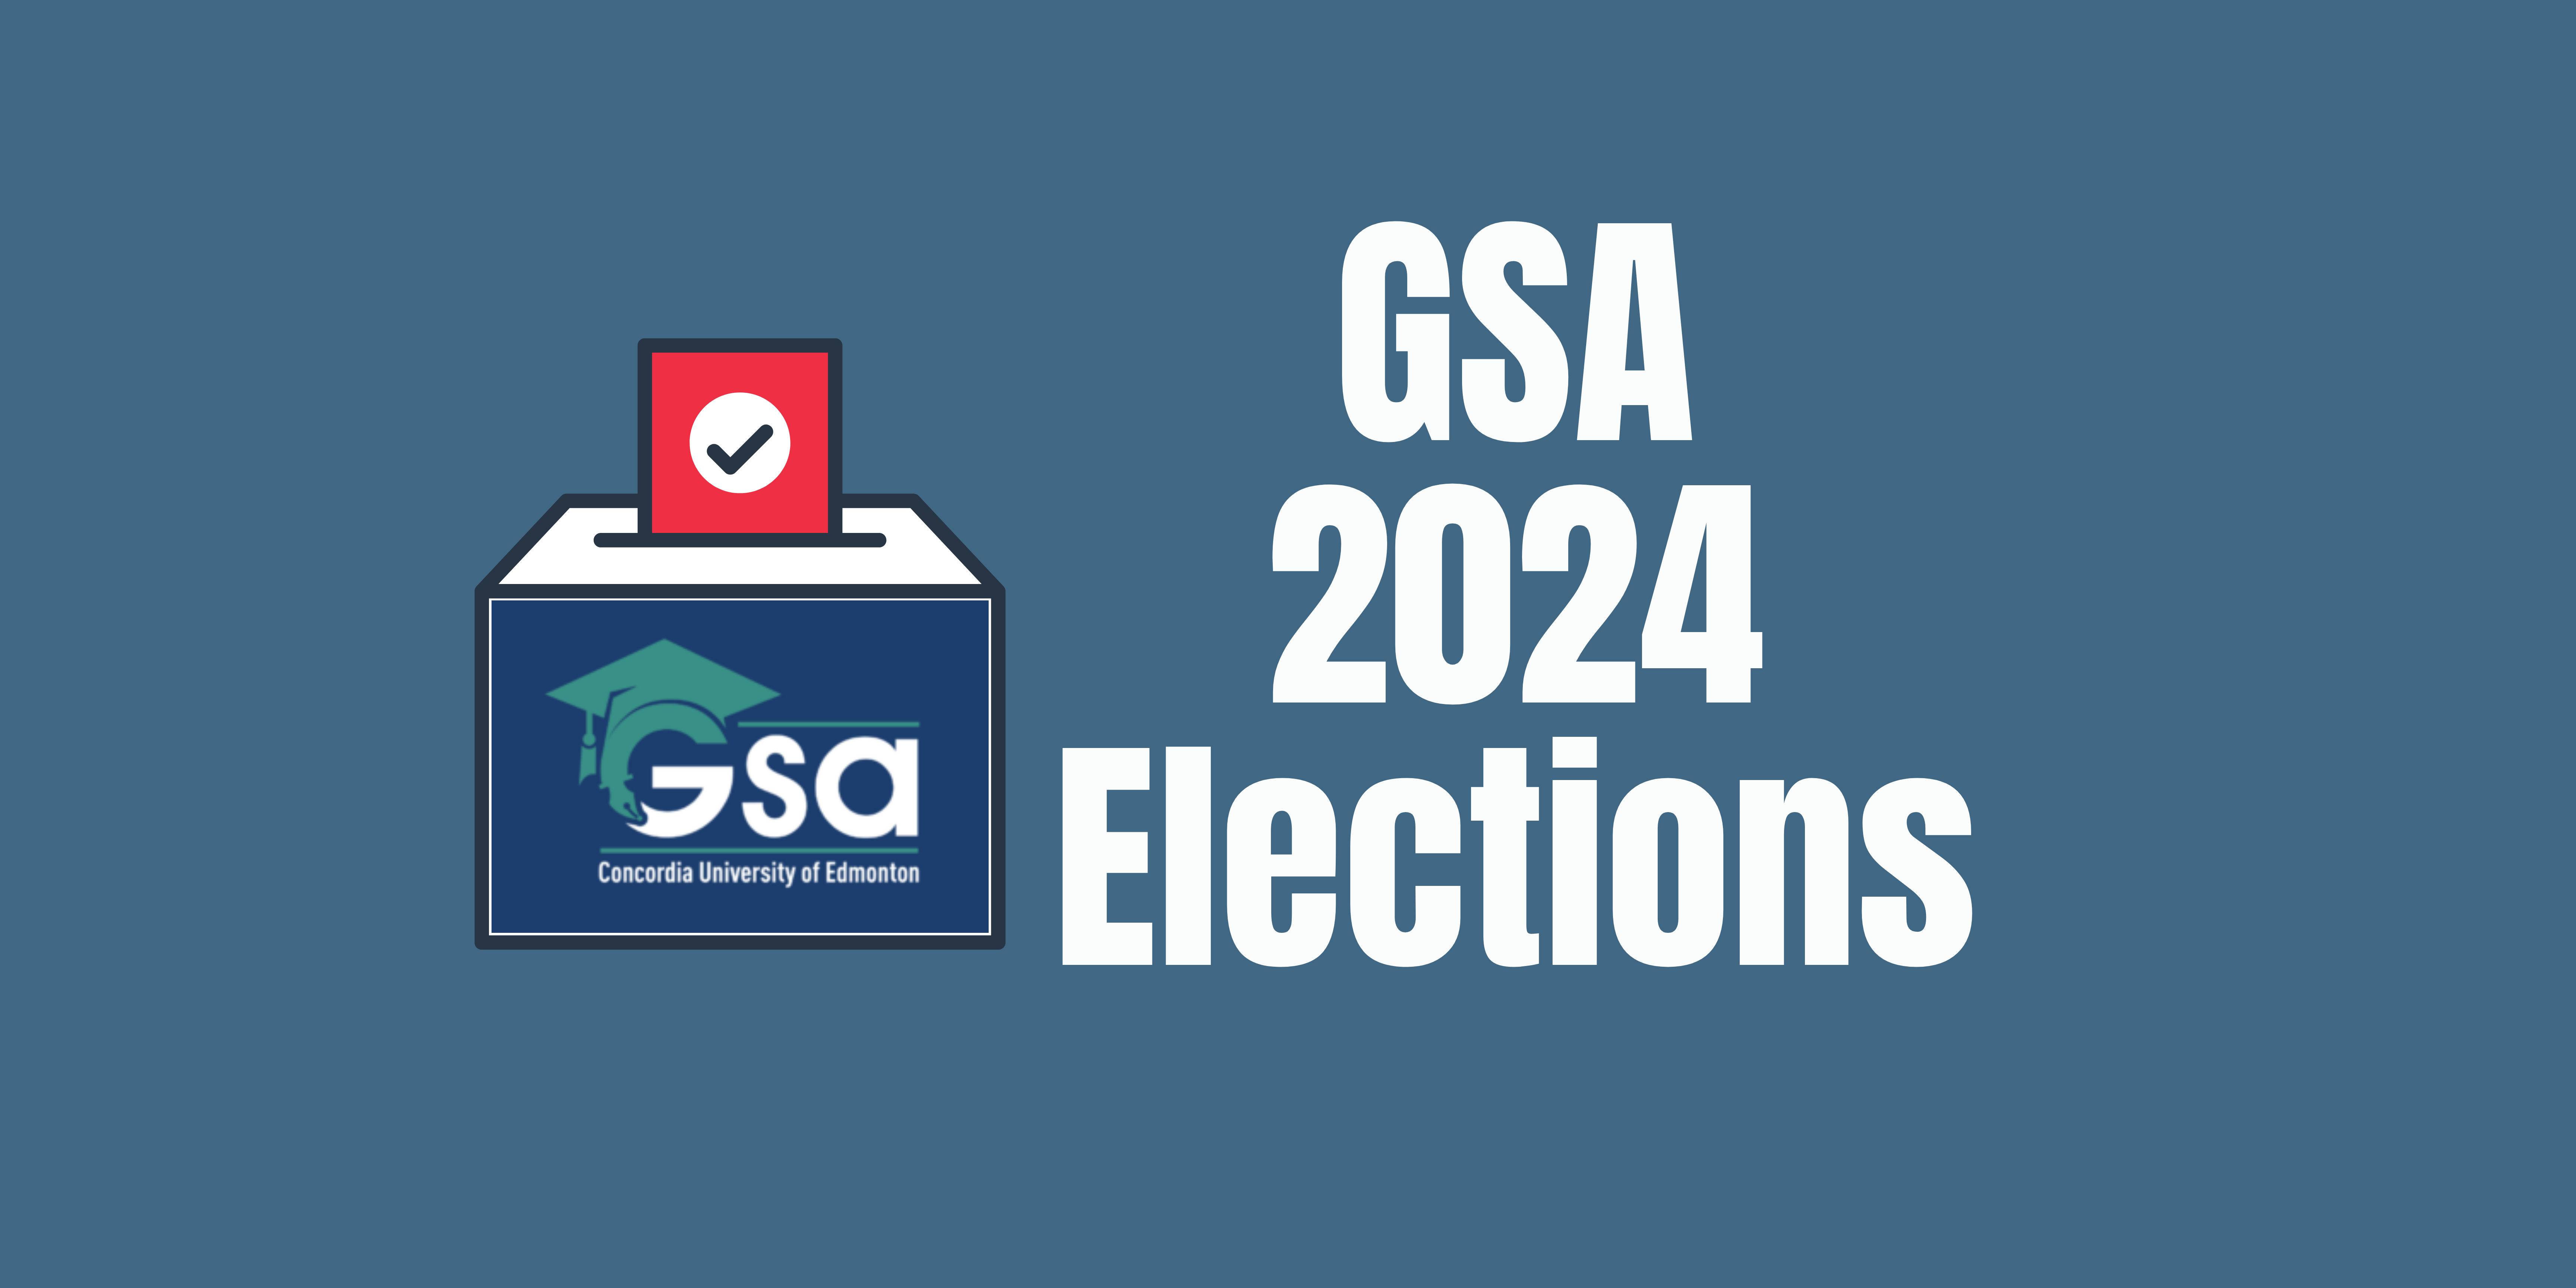 Graduate Student Association Elections are on!